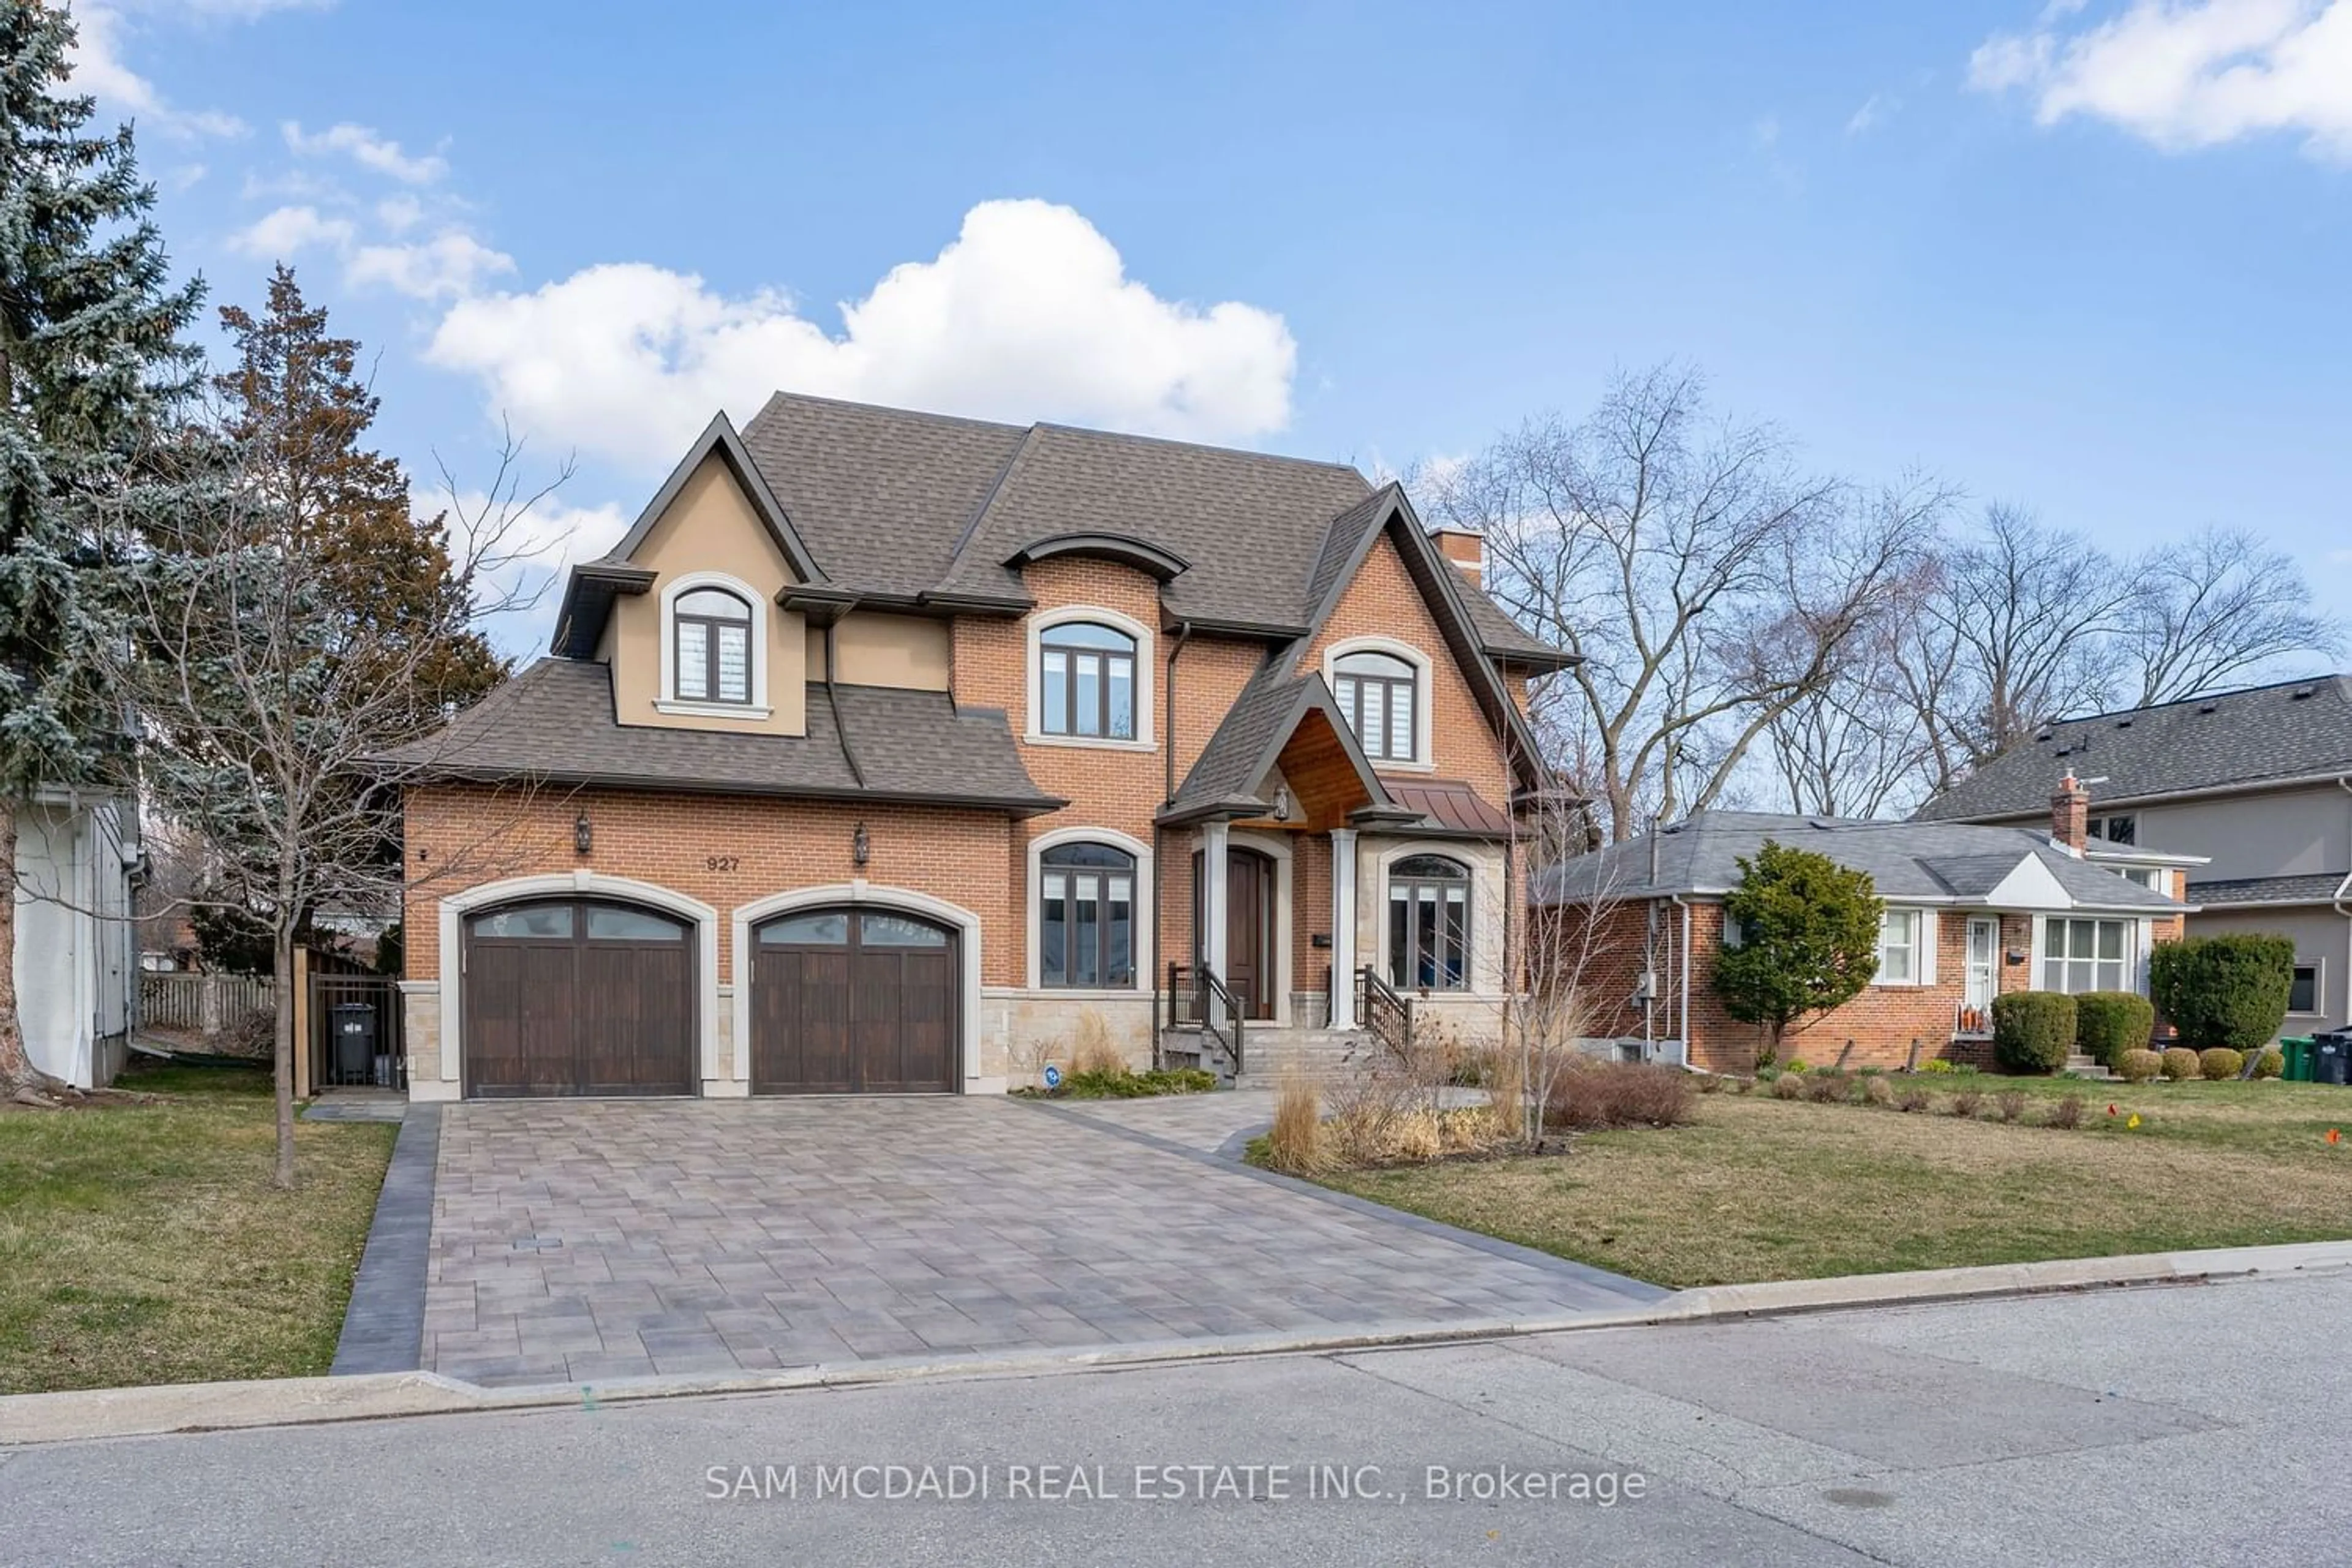 Home with brick exterior material for 927 The Greenway, Mississauga Ontario L5G 1P7